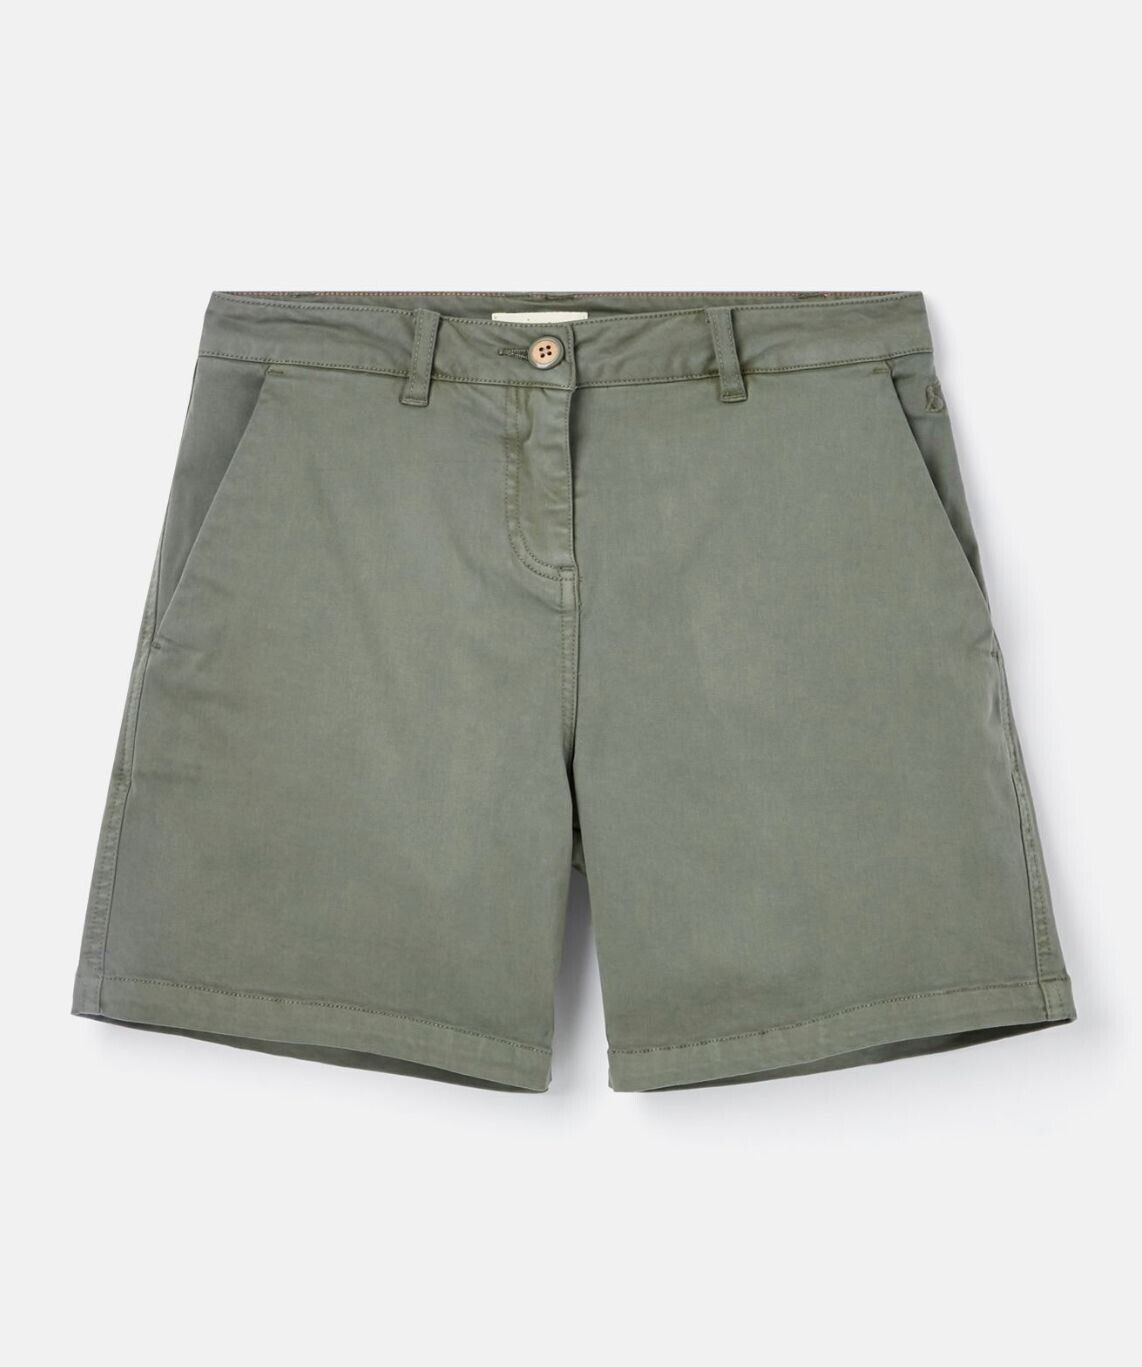 EX Joules Cruise Mid Thigh Length Chino Shorts in Seaweed Green 6-18 RRP £39.95